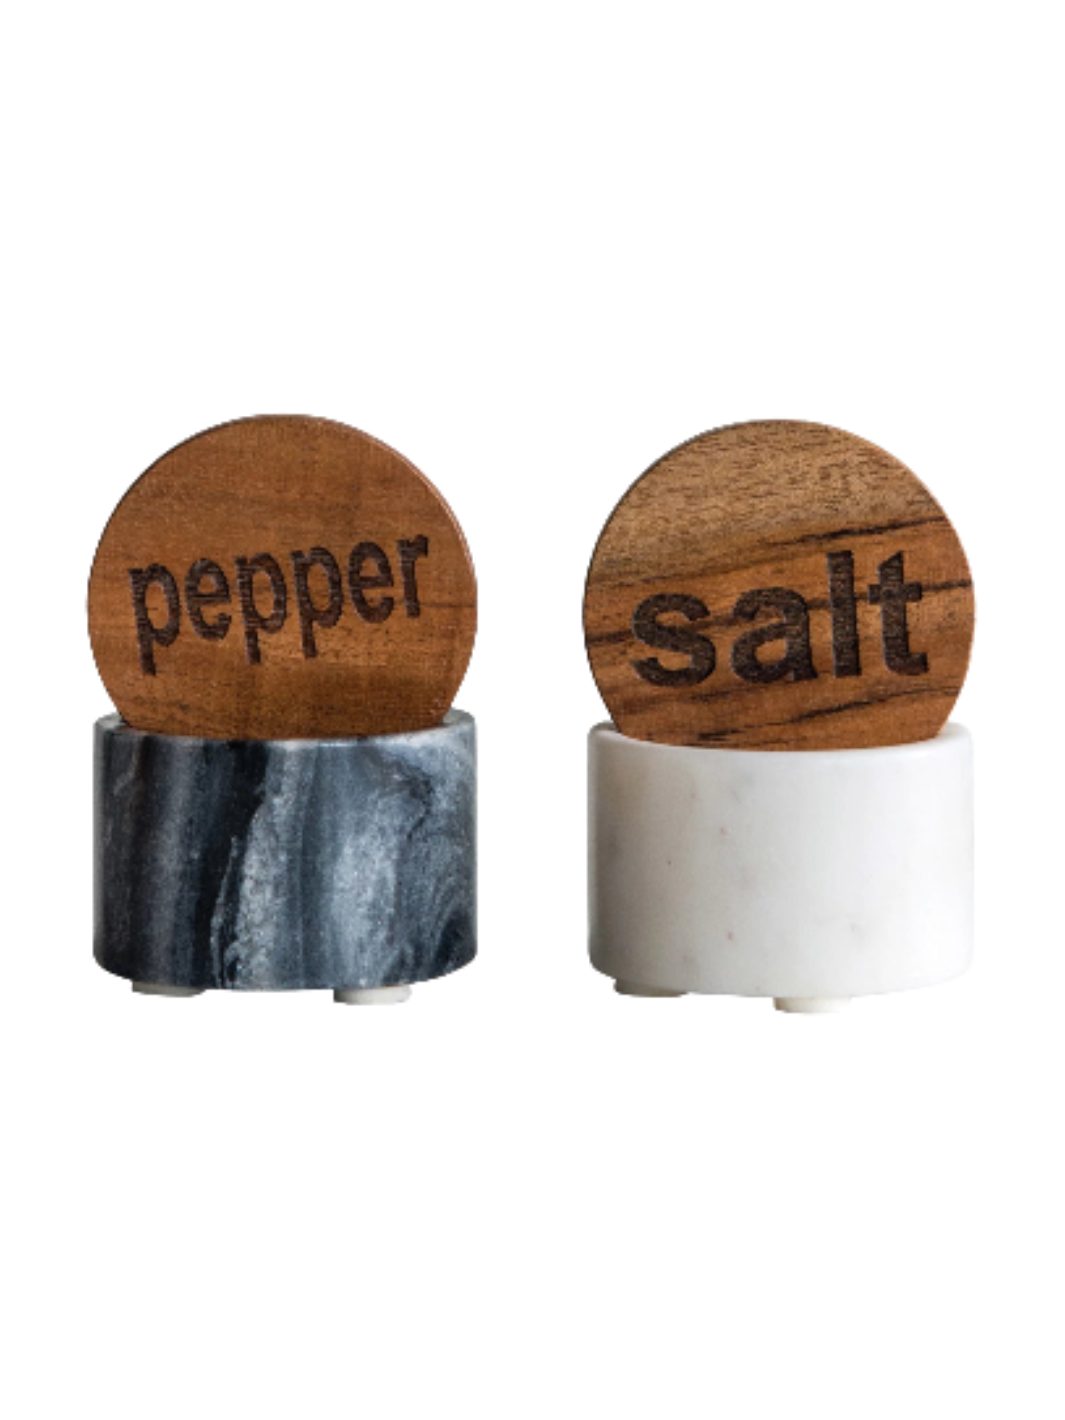 Salt and Pepper Containers